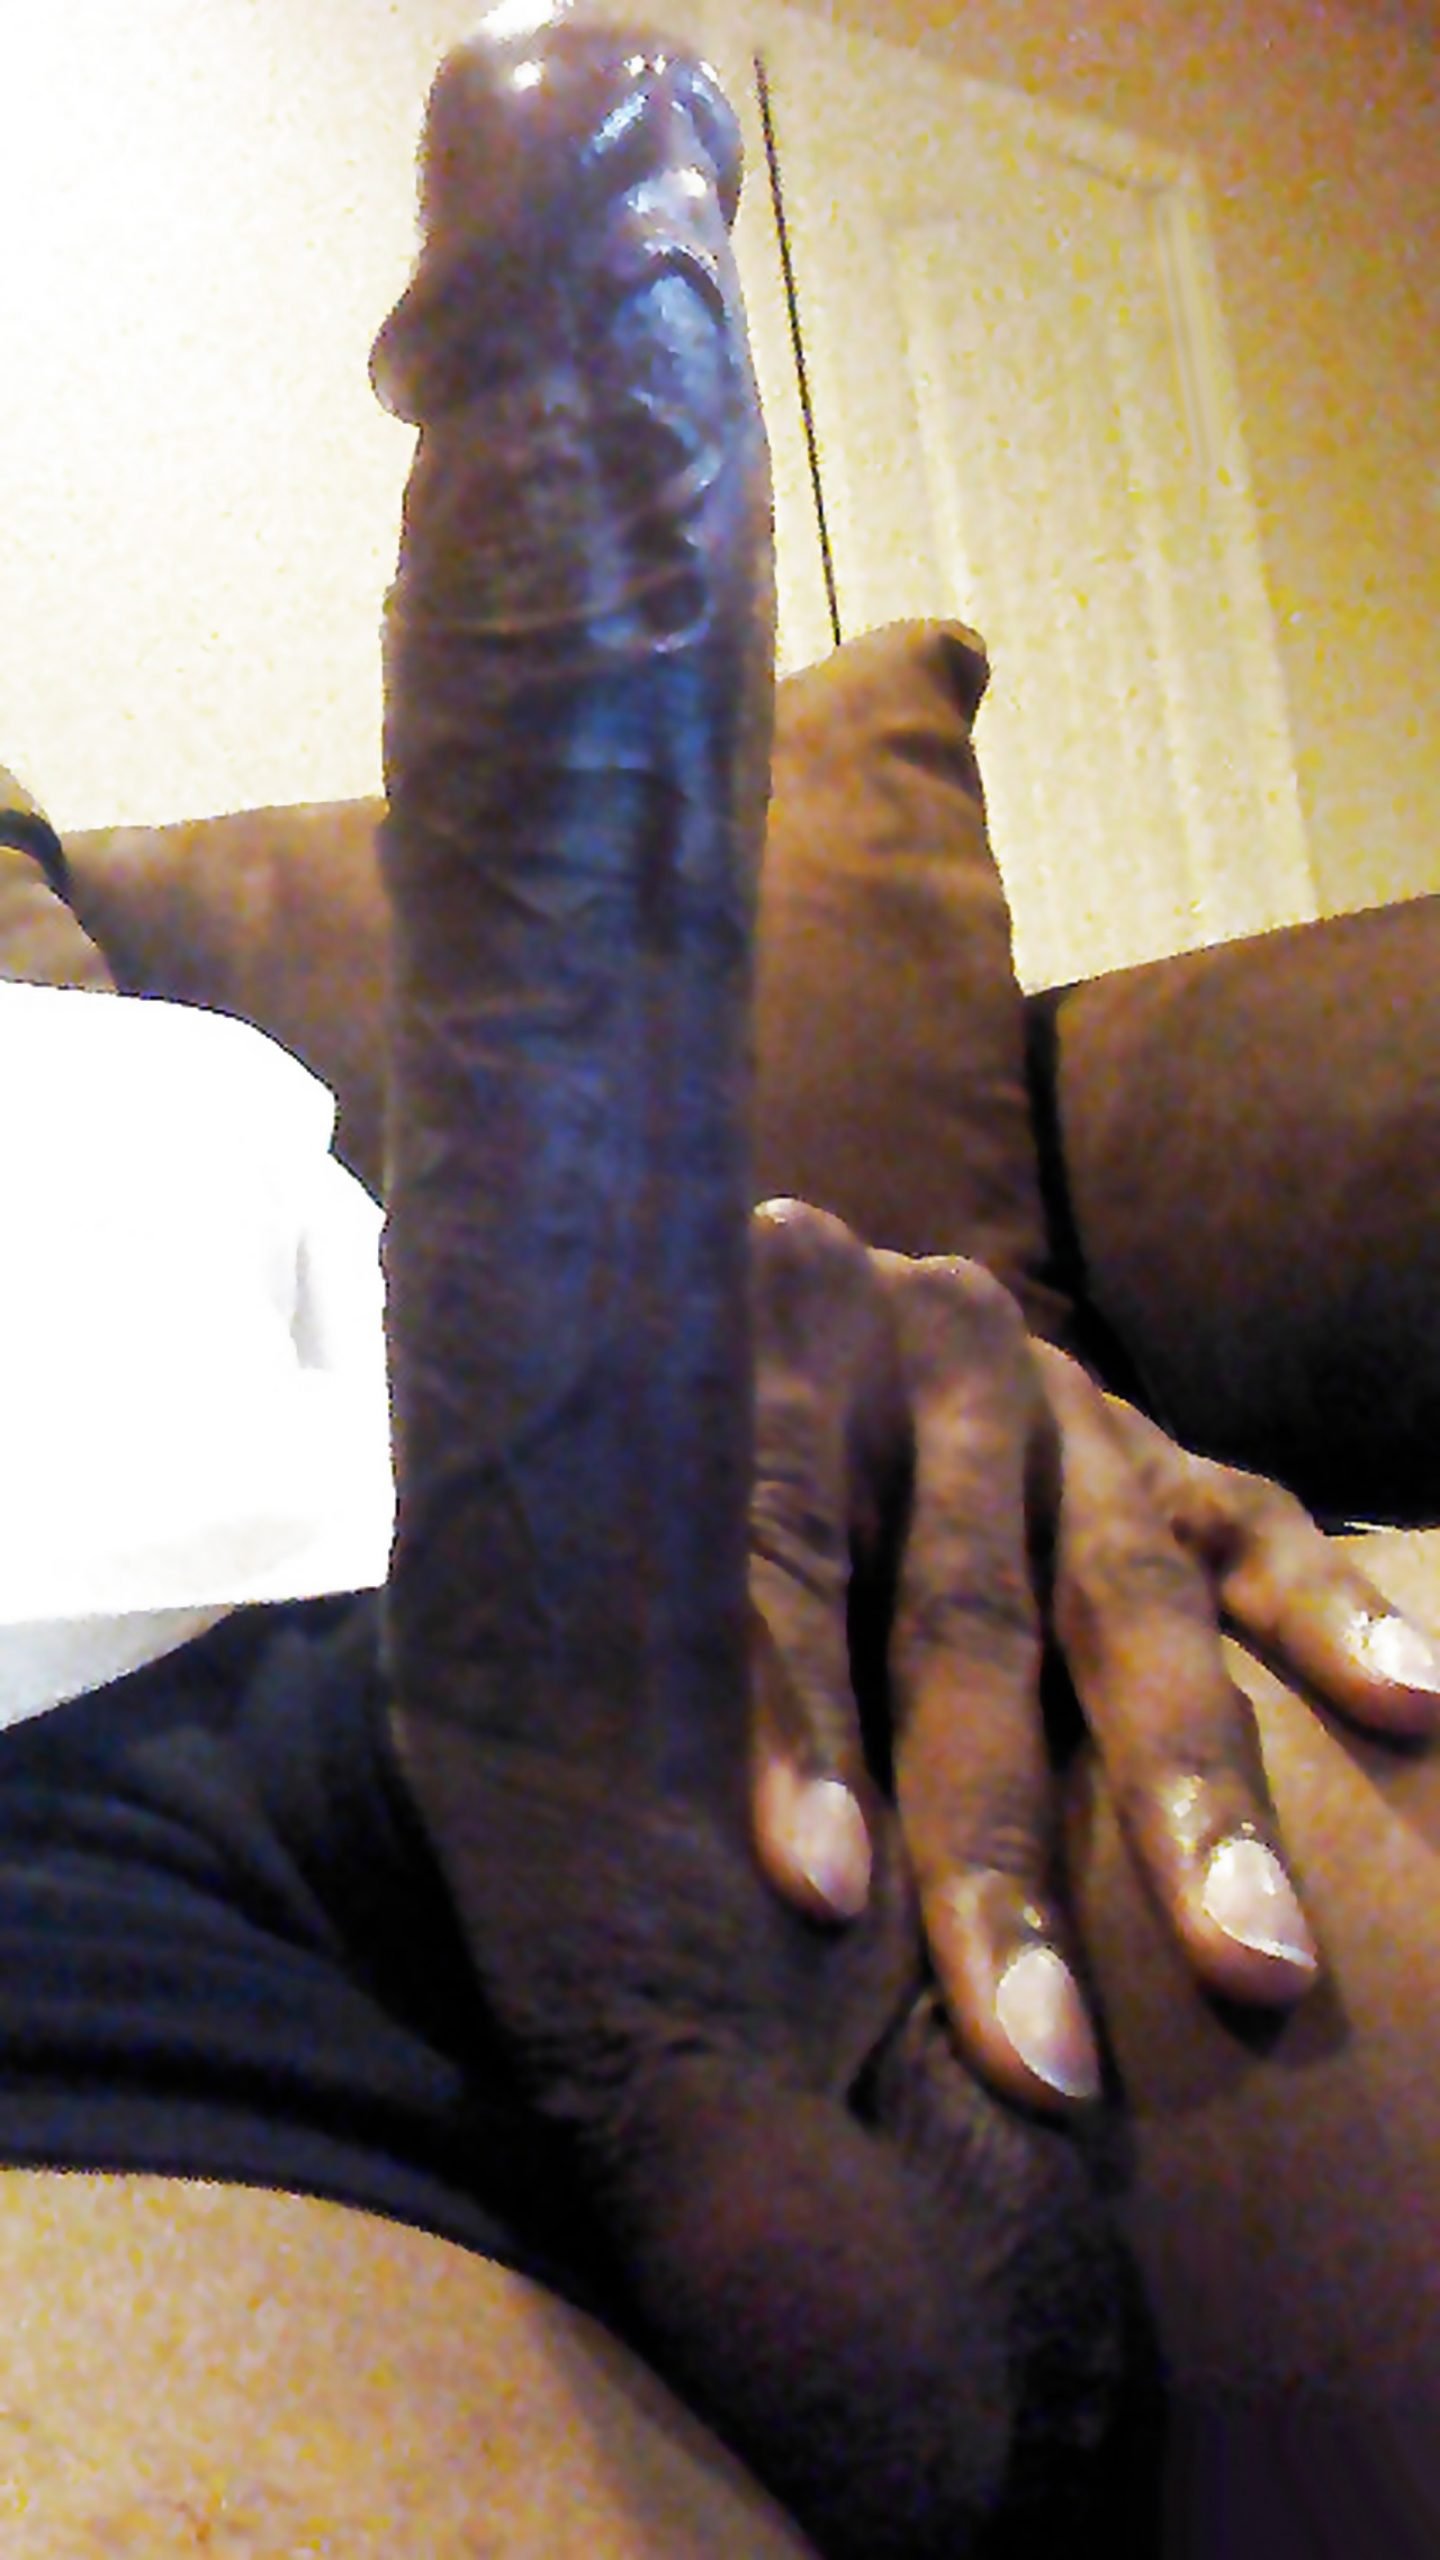 Dick Bbc Selfie Black Cock Porn Results Showing 51 Of 52